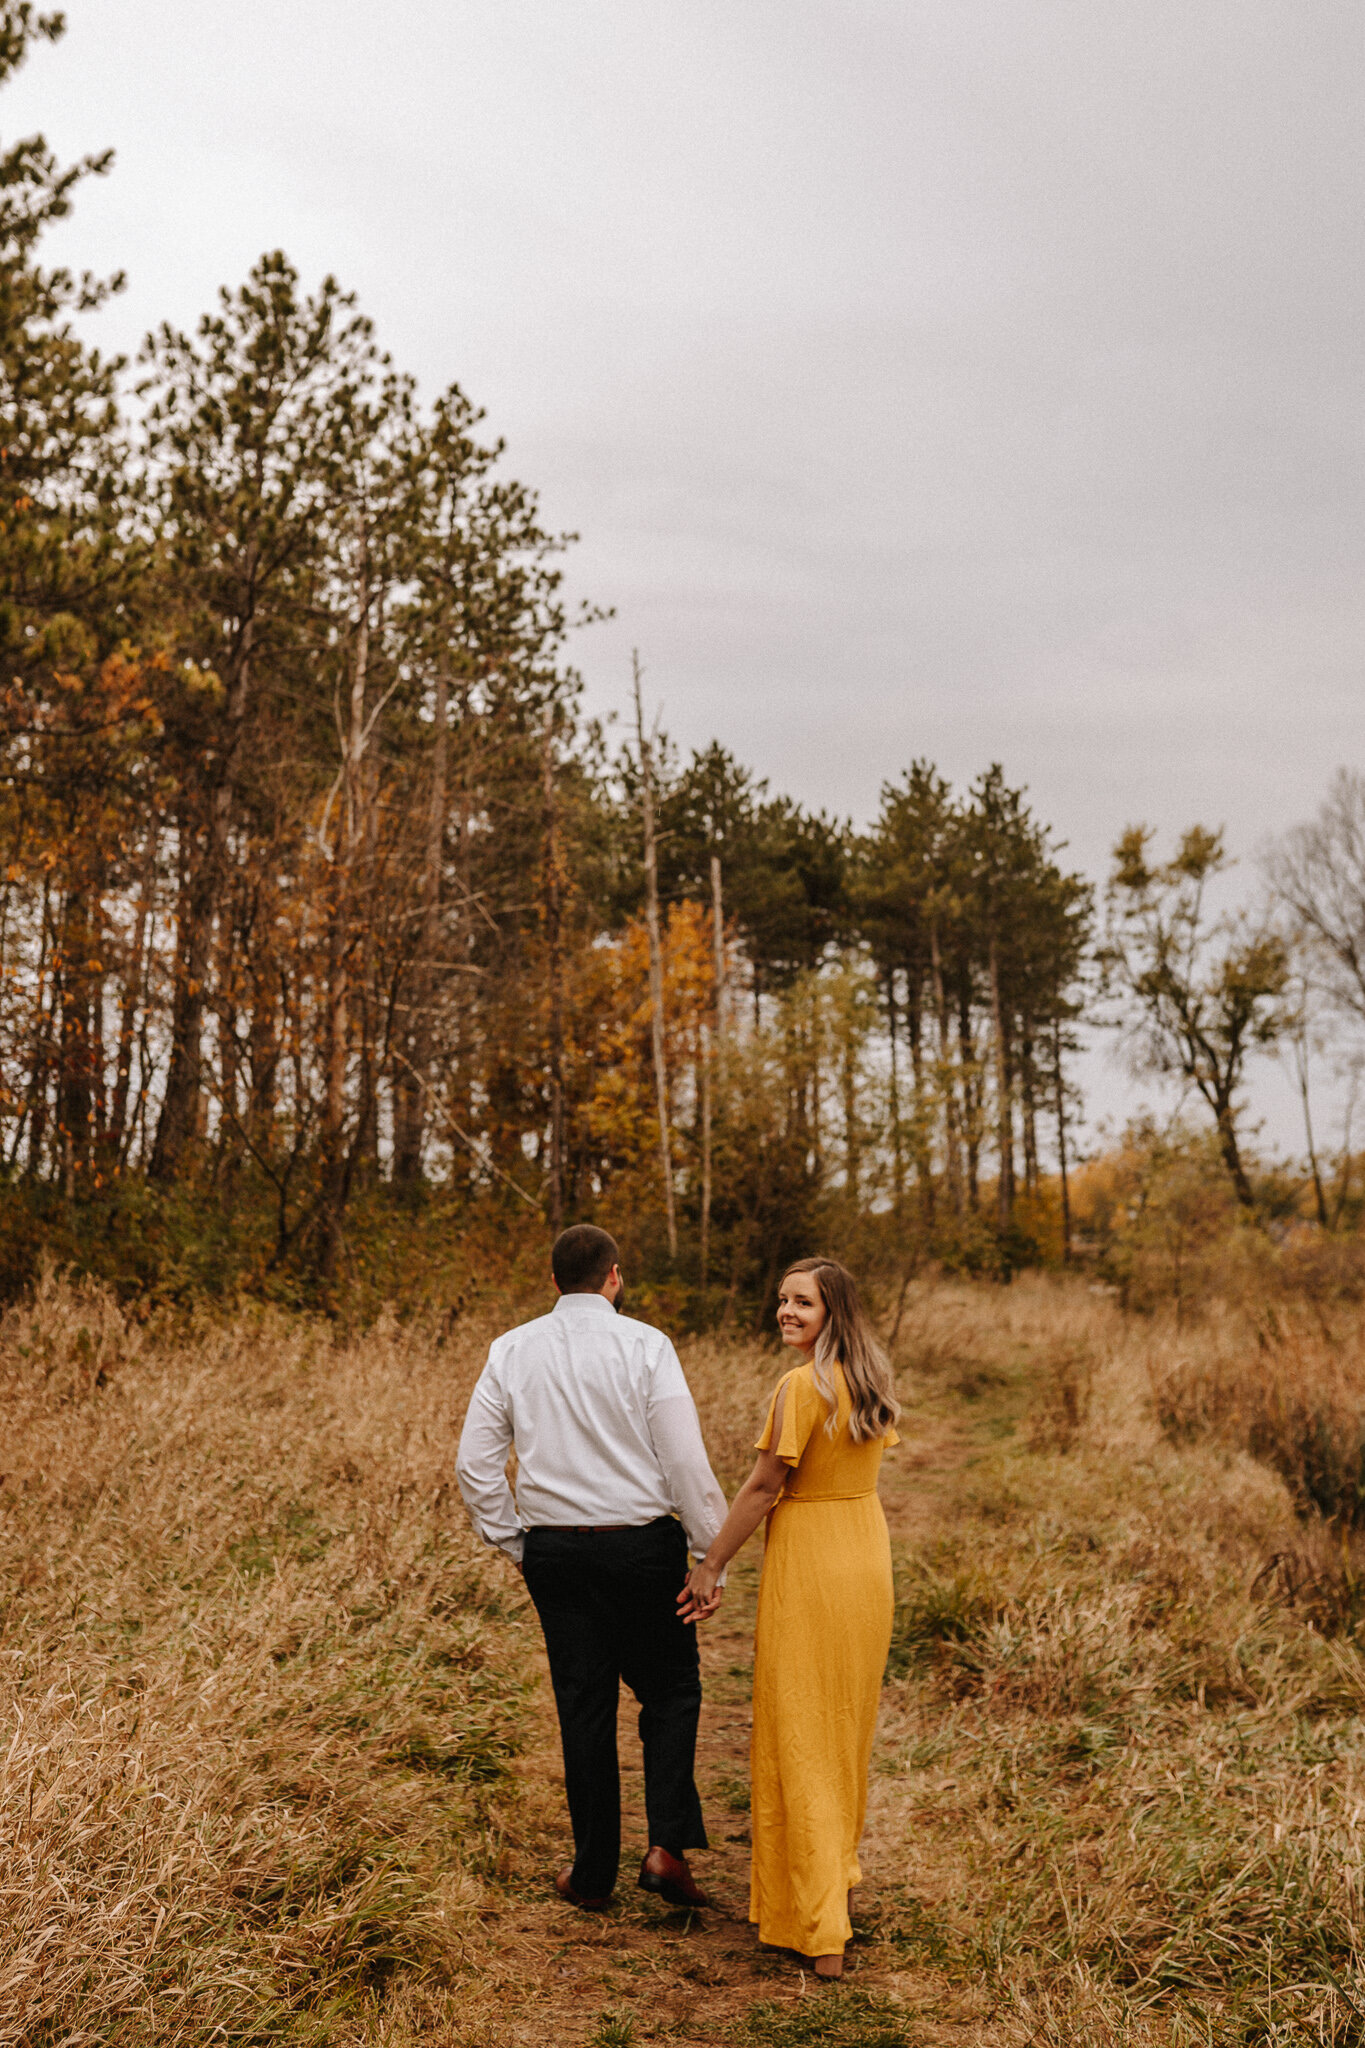 Bettyannphotography-wedding-couples-engagement-midwest-desmoines-iowa-love-photographer-fall-session8.jpg